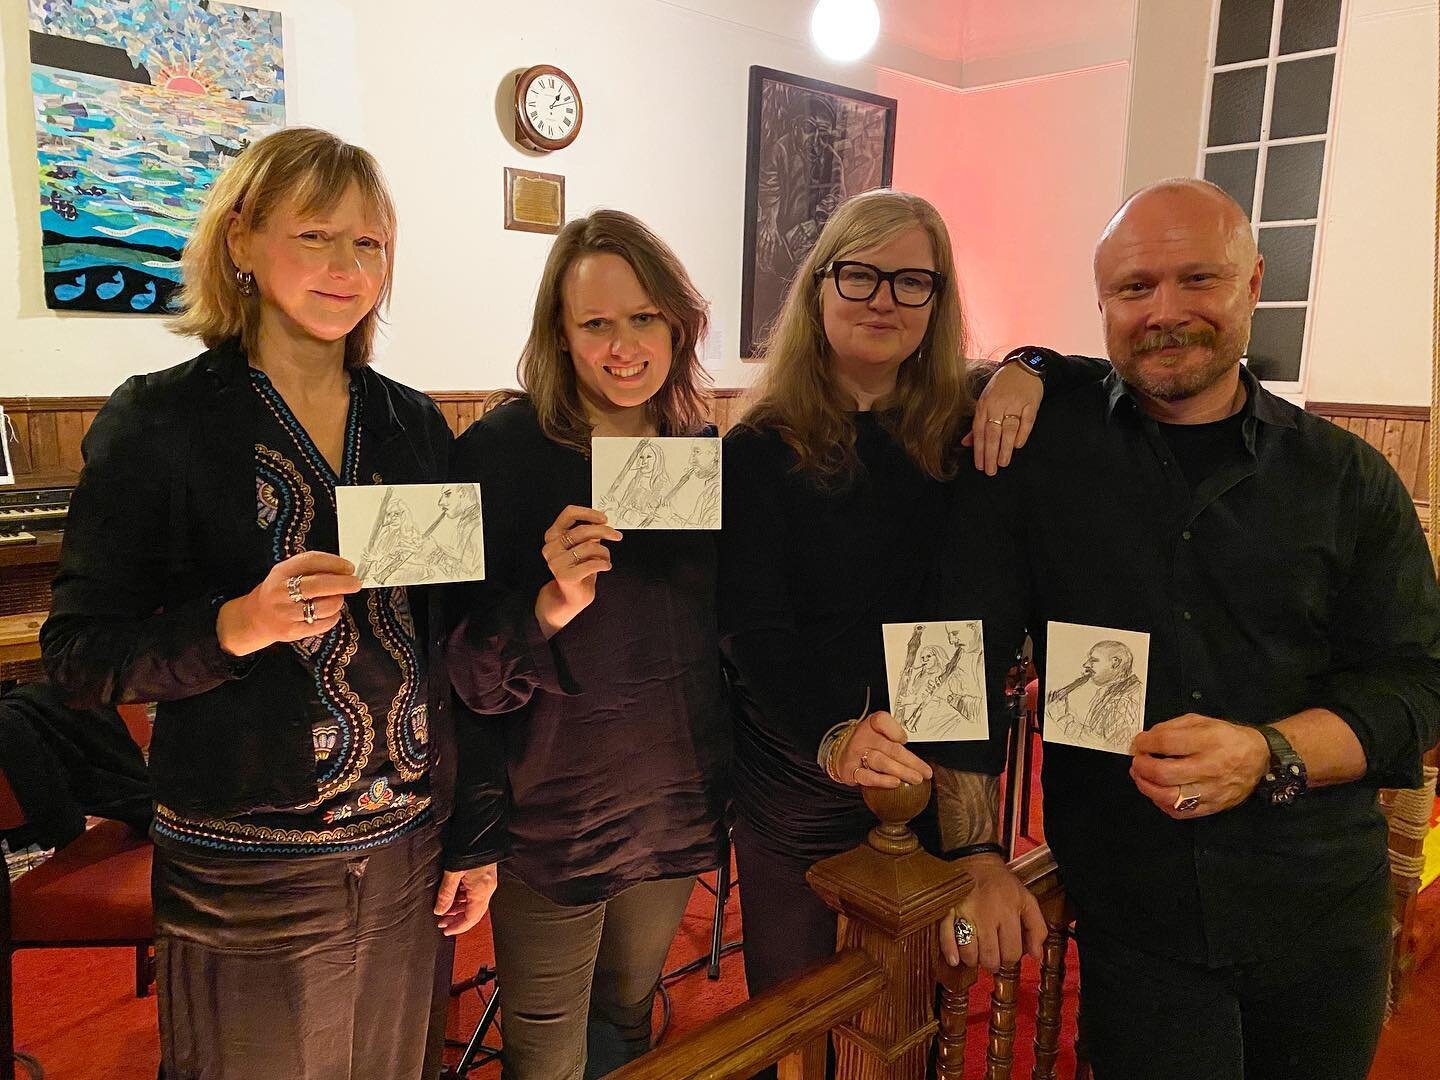 After the gig at Hymhus Bigton  @paulbloomerartist gifted us the sketches he made during the concert.
Thank you Paul!

#armada1588